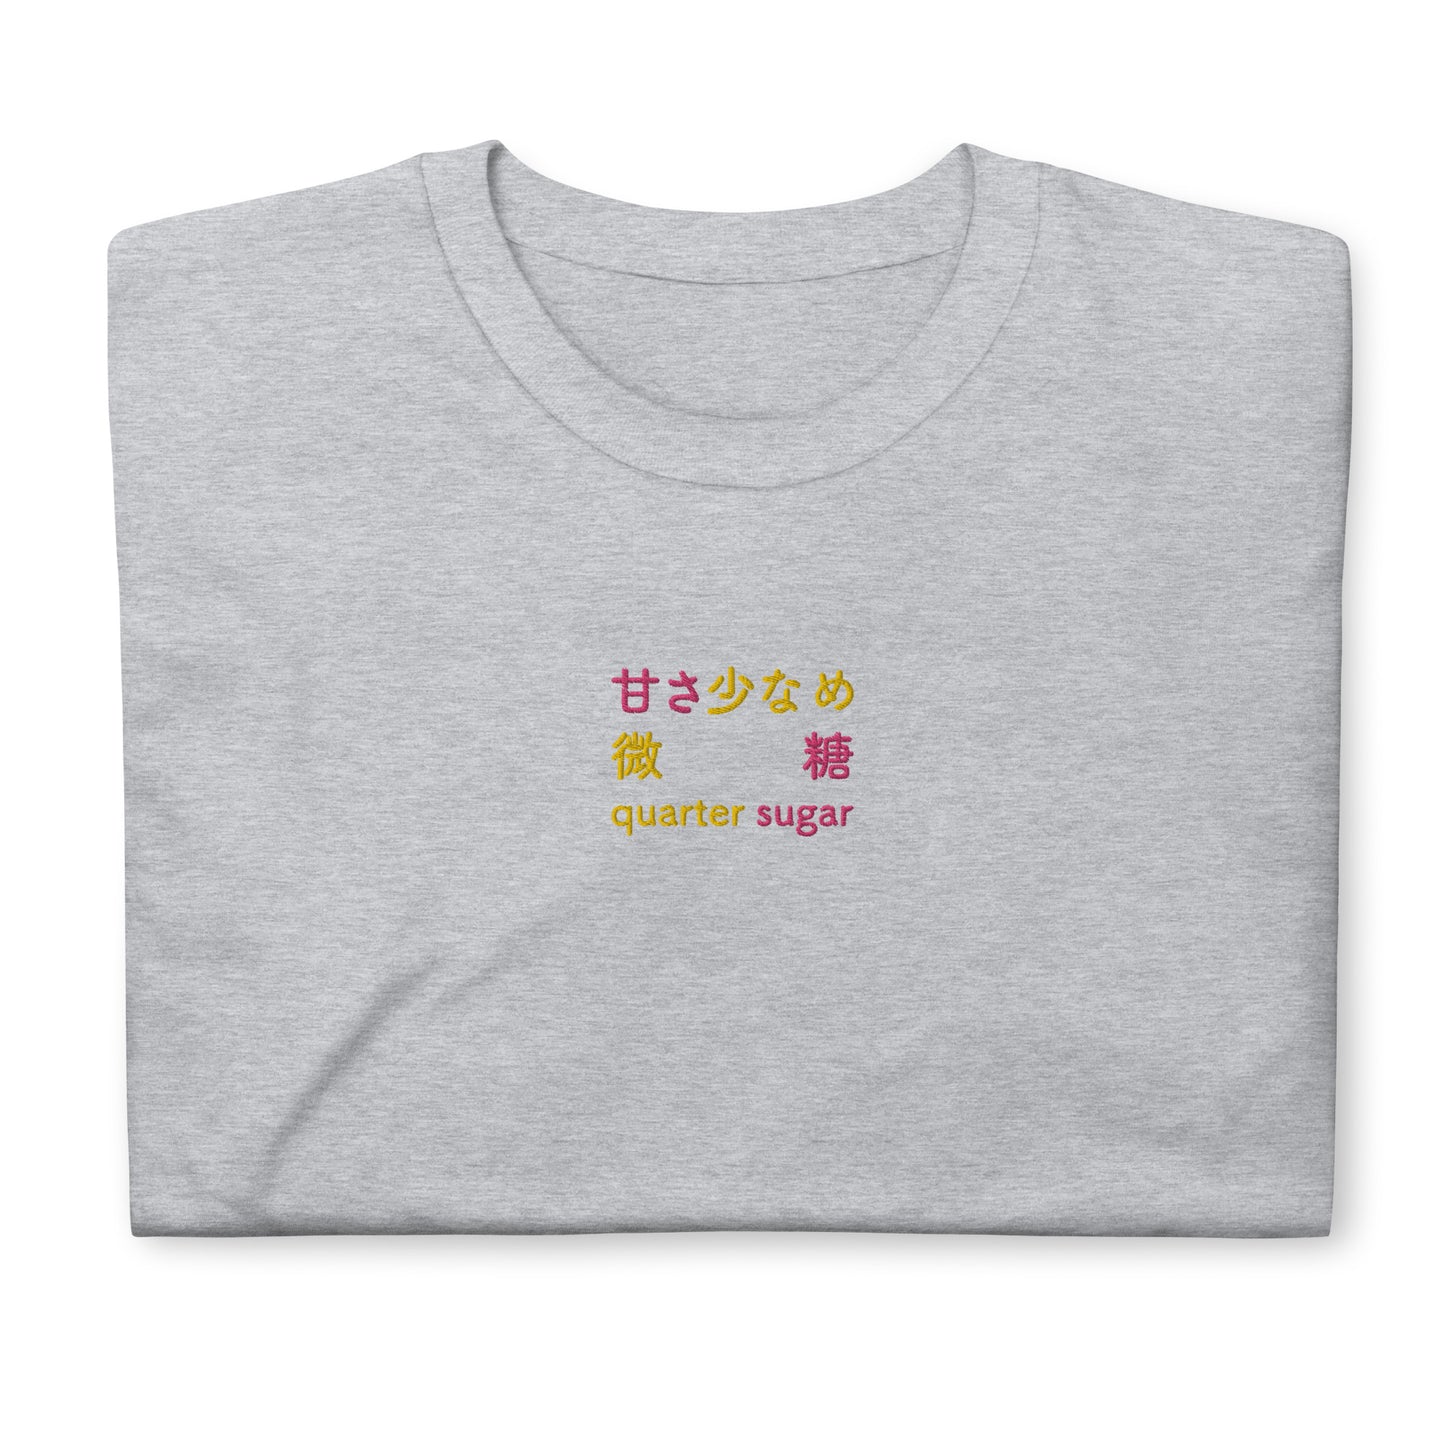 Light Gray High Quality Tee - Front Design with an Yellow, Pink Embroidery "Quarter Sugar" in Japanese,Chinese and English